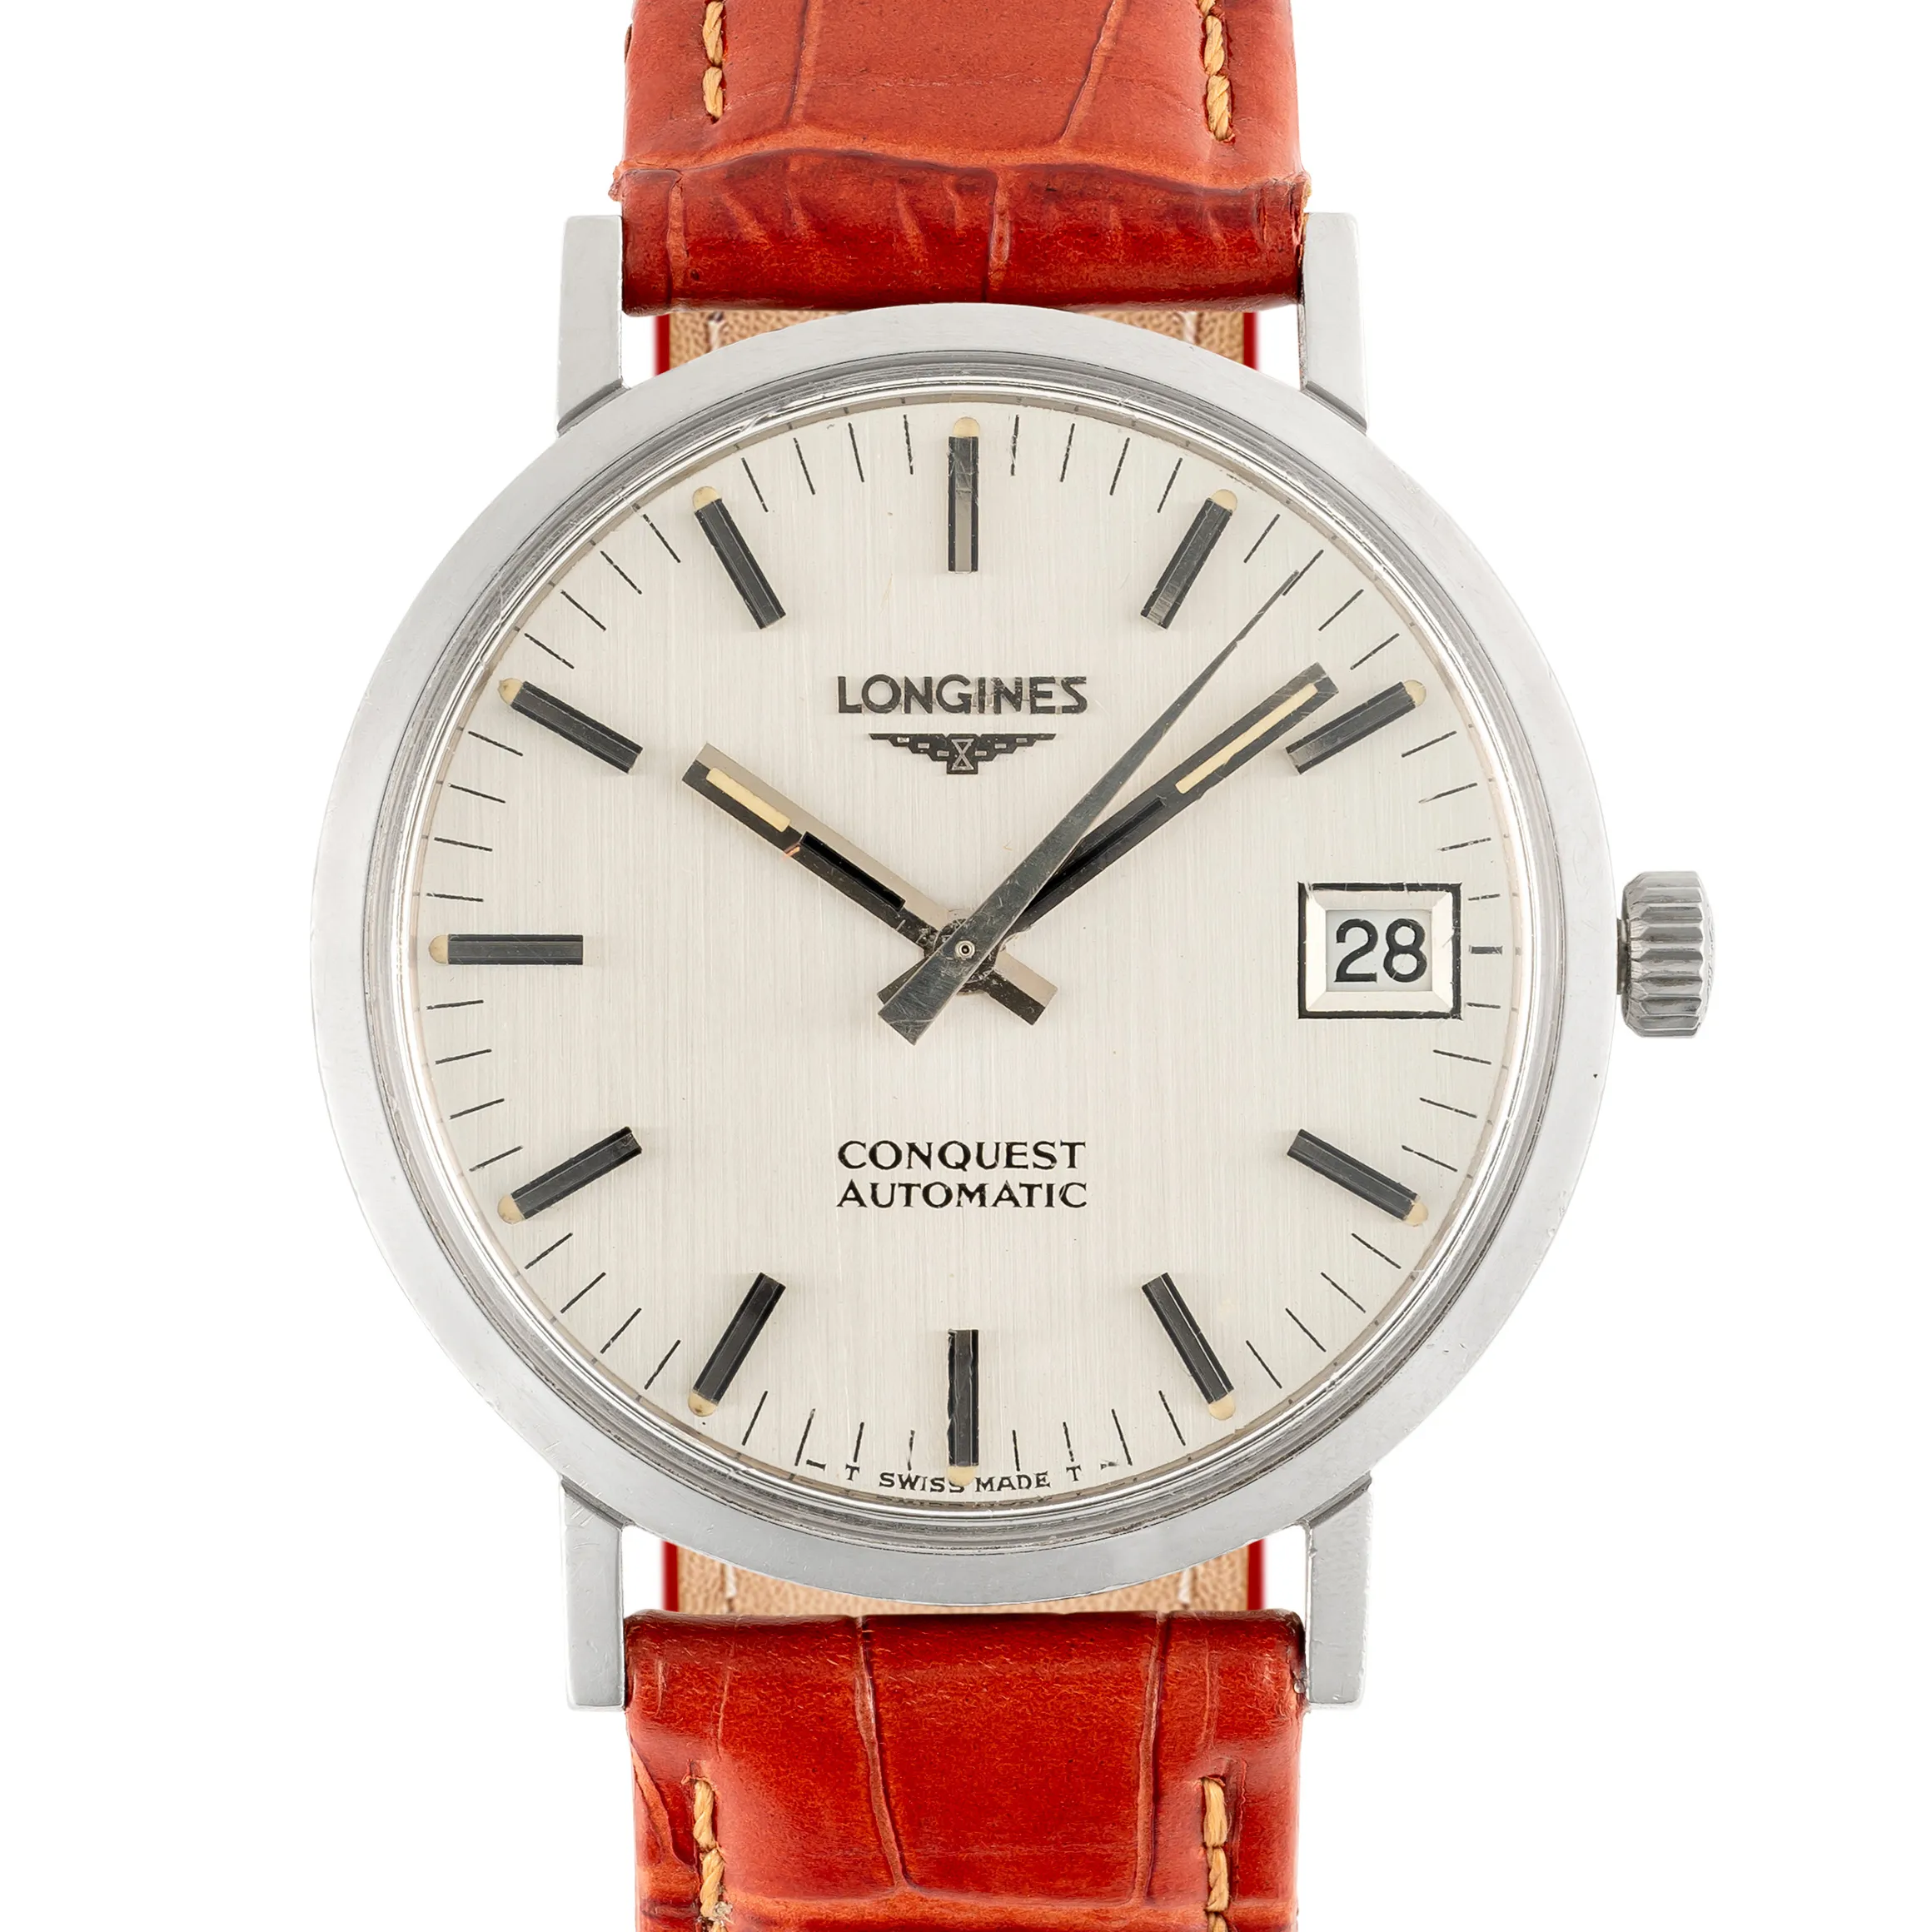 Longines Conquest 1503 1 35mm Stainless steel Silver